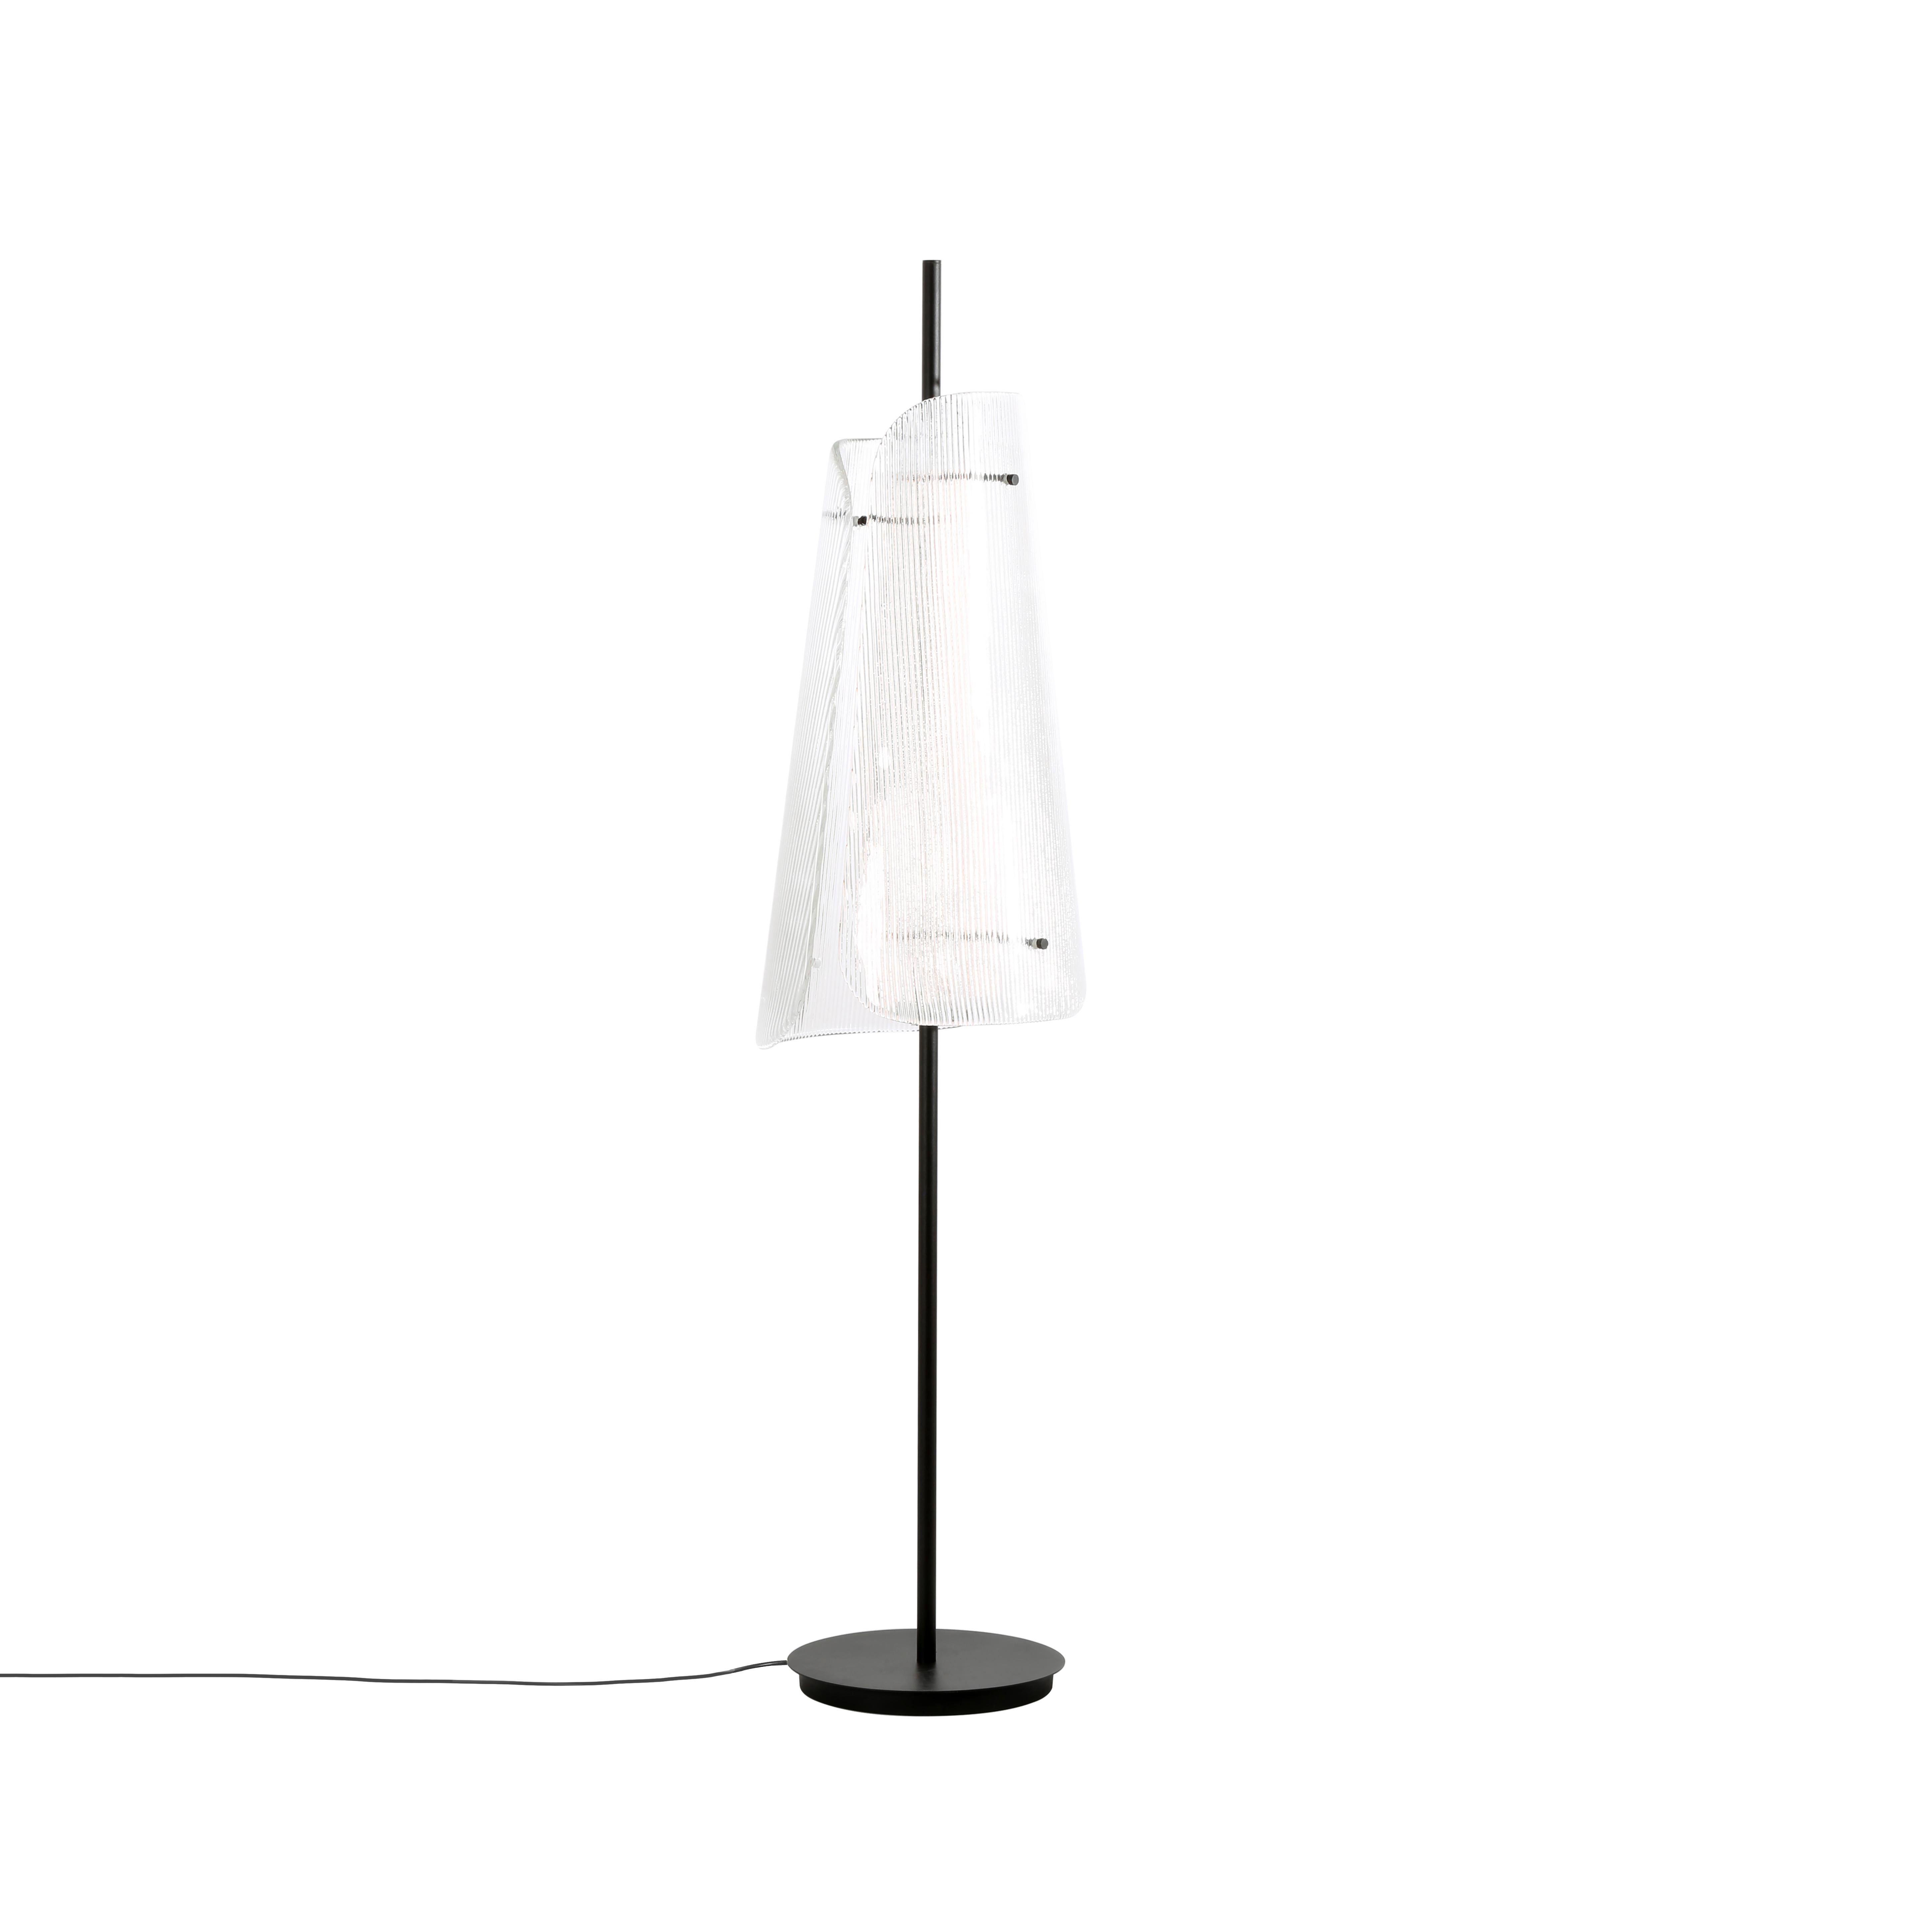 Bent two transparent black floor lamp by Pulpo
Dimensions: D34 x H164 cm
Materials: Steel powder coated, 2 shades, casted glass, textile.

Also available in different finishes: Smoky grey black, transparent black, smoky grey champagner,